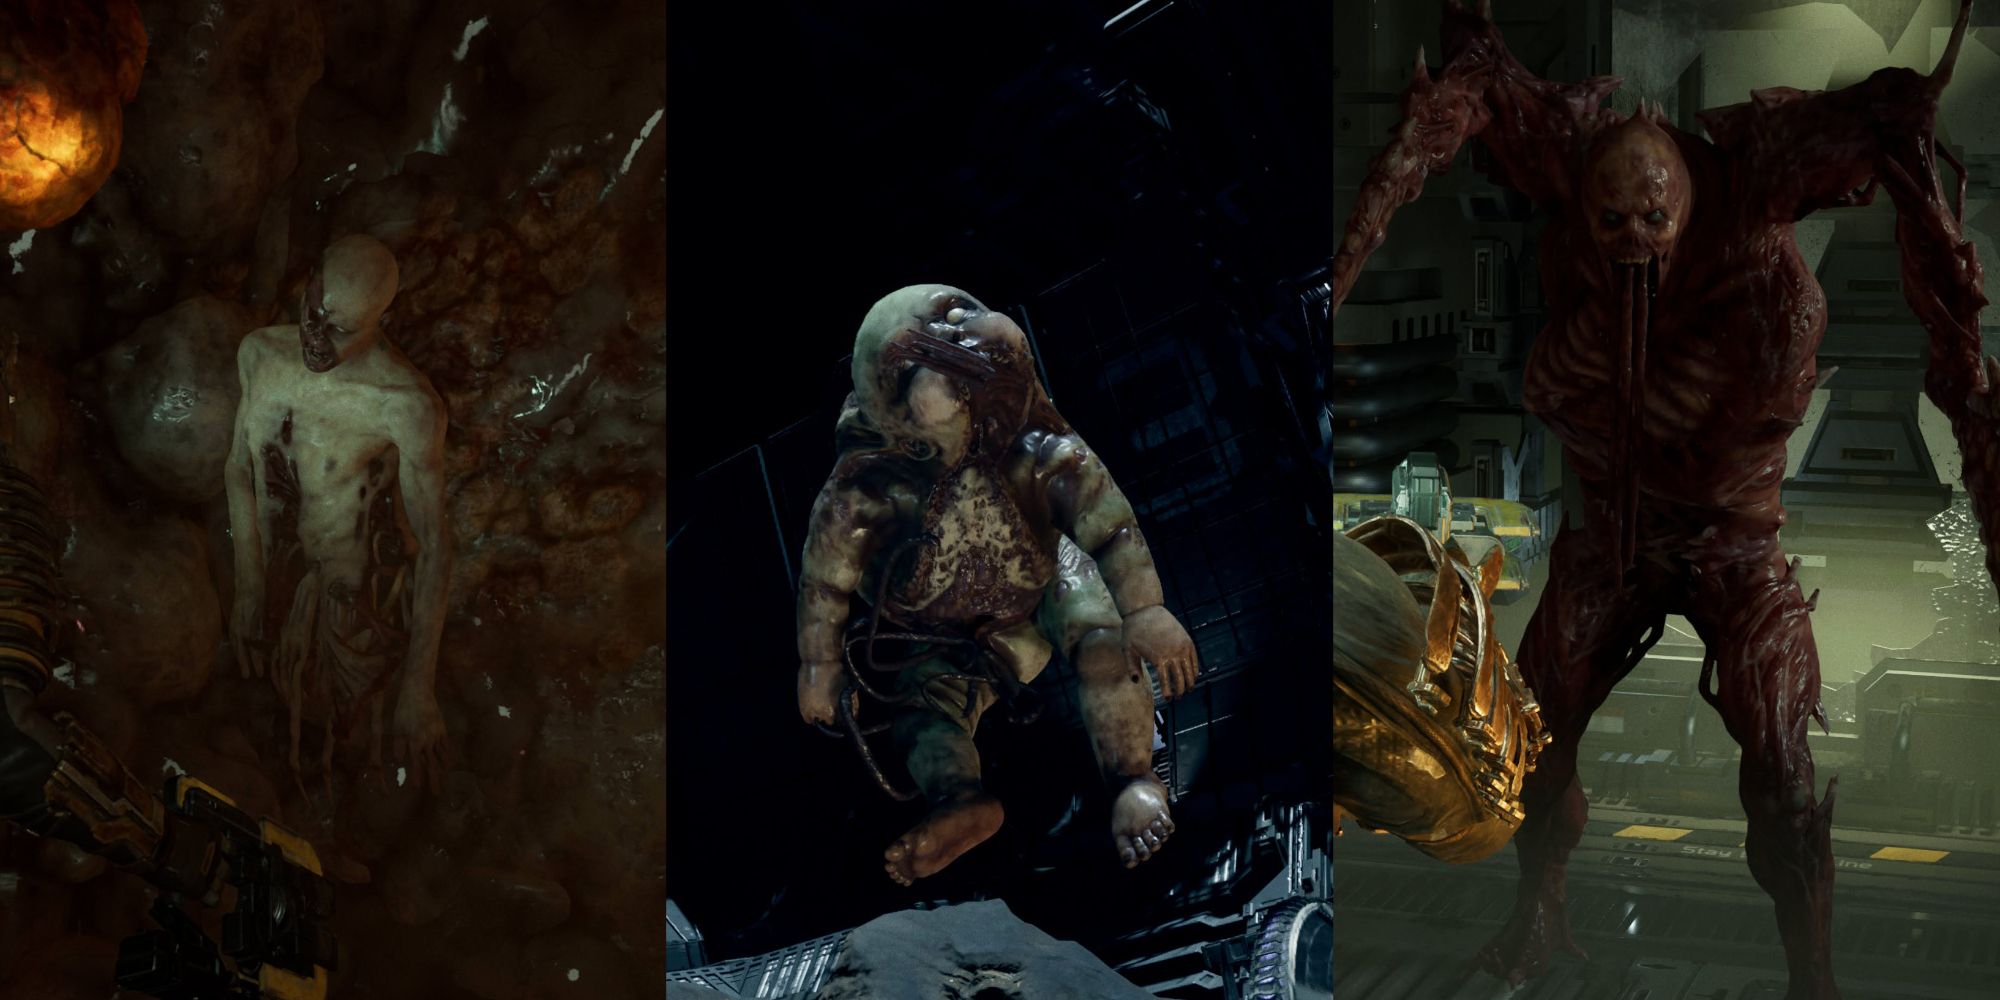 A montage of three images capturing three Necromorphs from Dead Space - (from left to right): a corpse fused to the wall, a dead Lurker, the Hunter